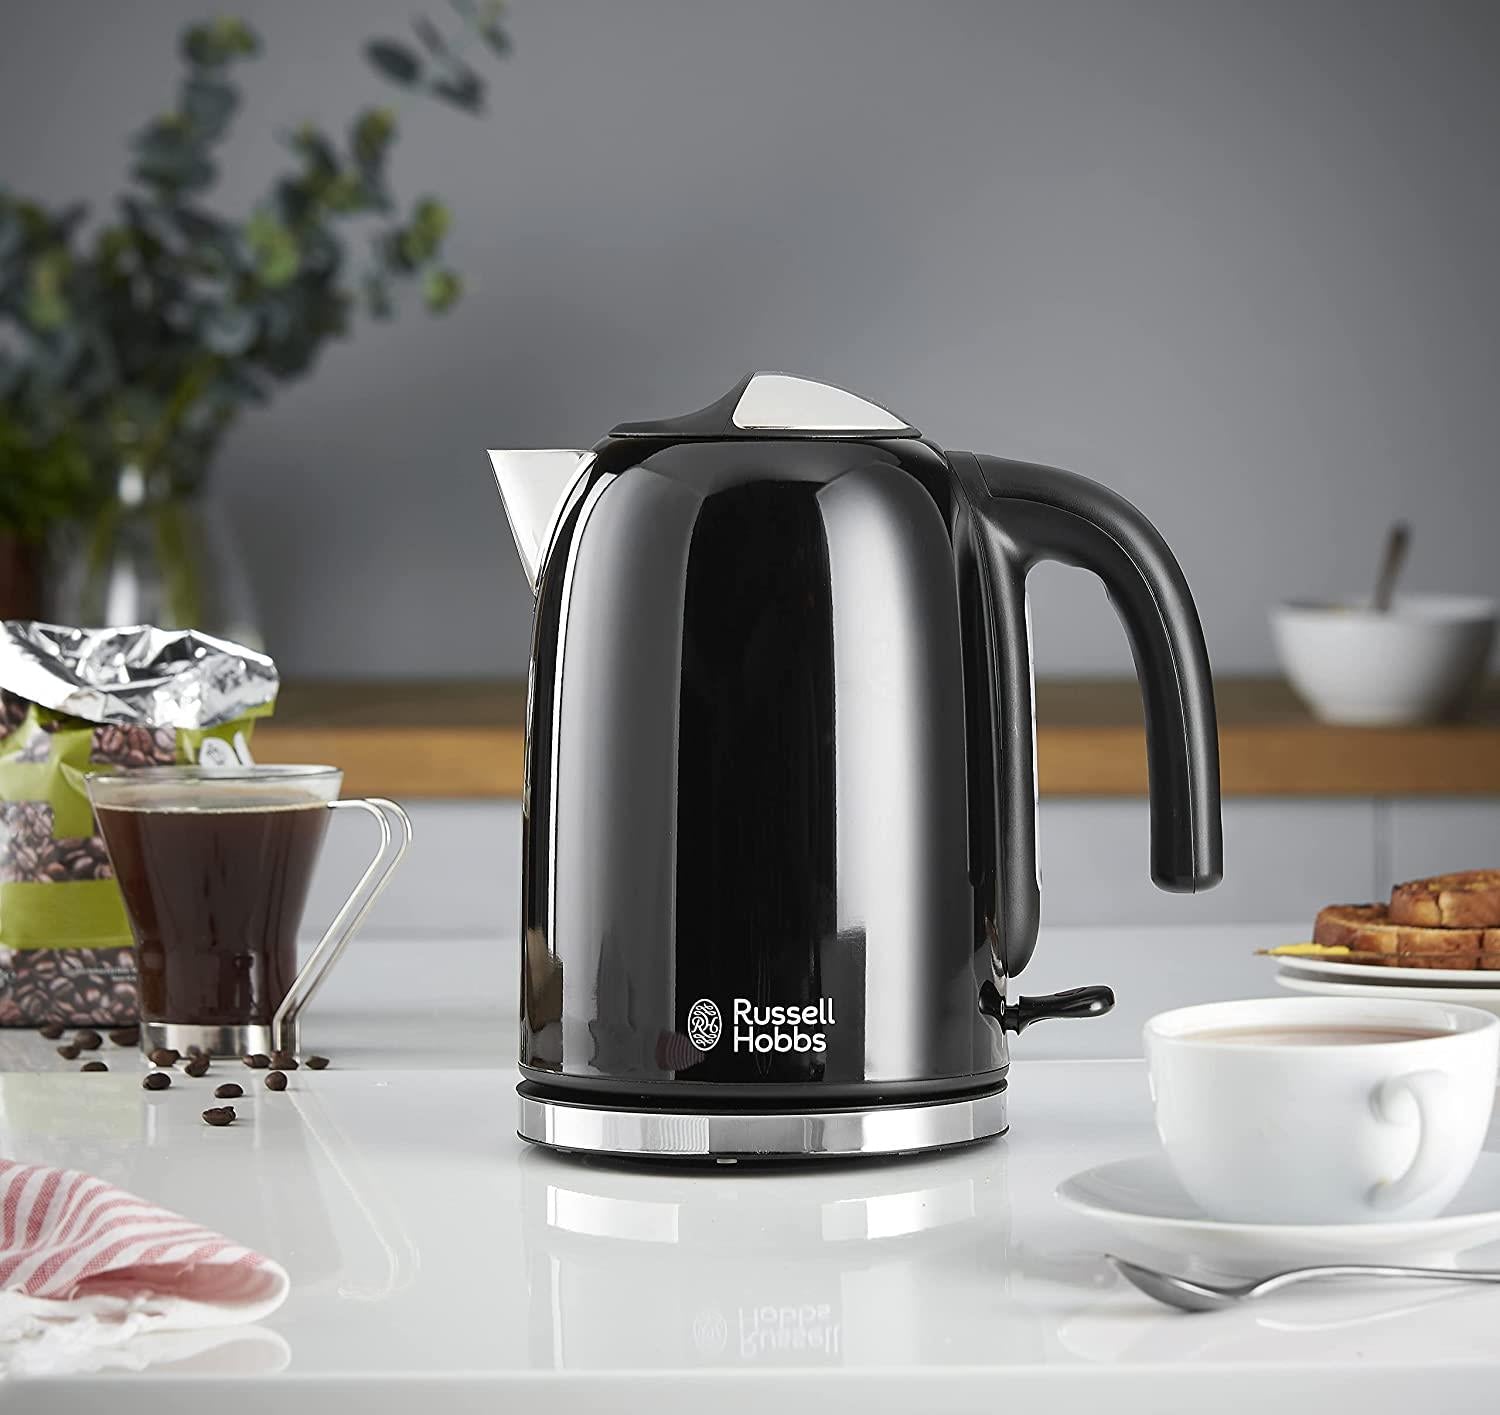 Russell Hobbs Electric Kettle Stainless Steel Jug 1.7 Litre Colours Plus Black - 20413